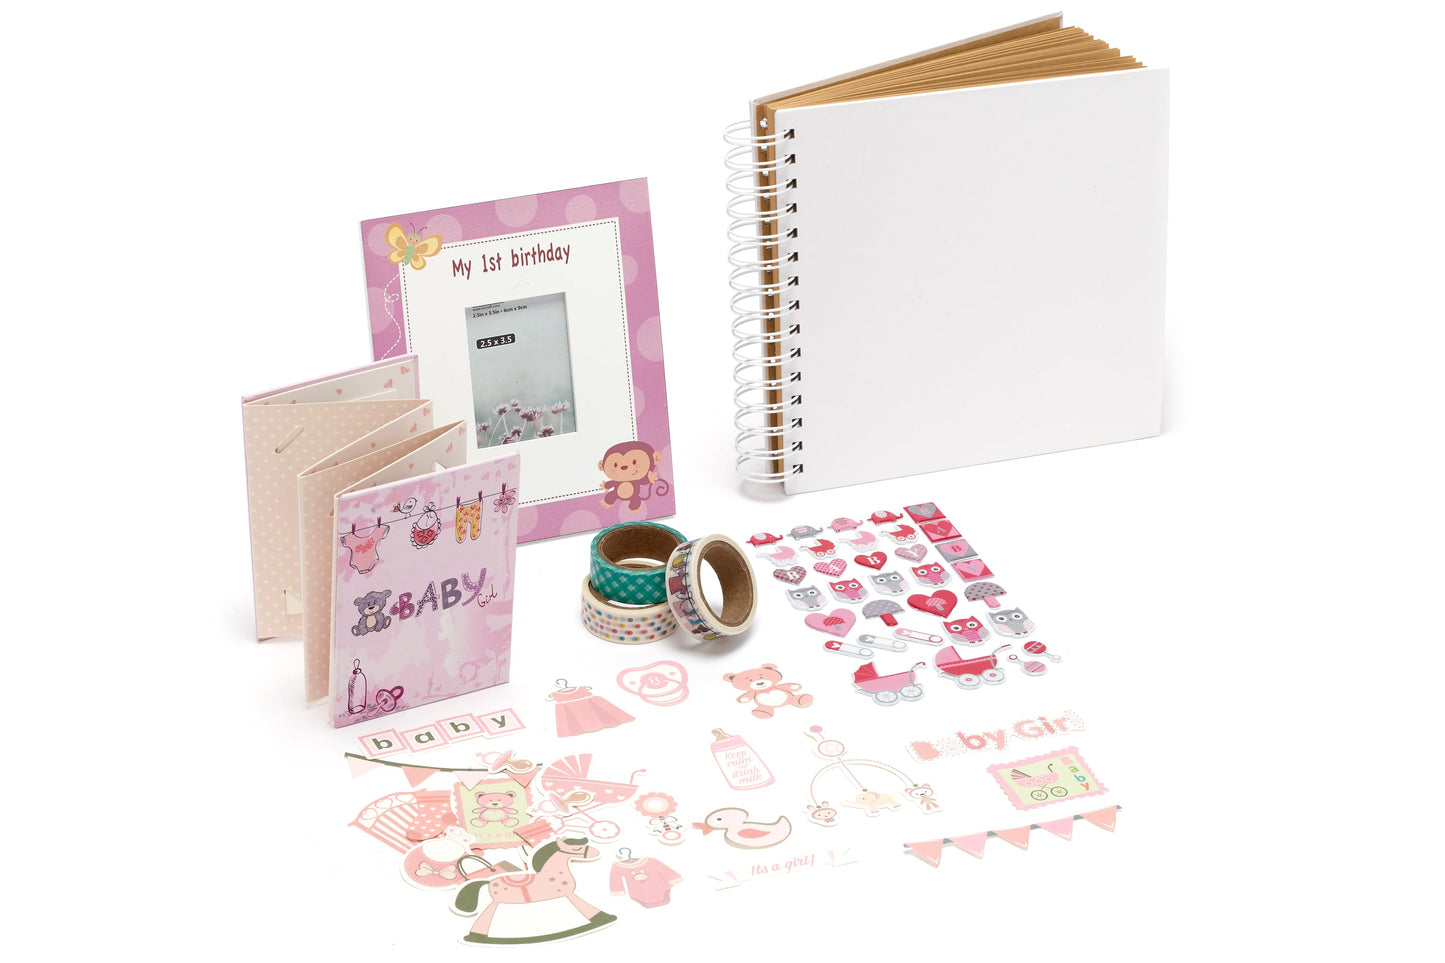 Fujifilm Instax Baby Girl 1st Year Bundle Accessory Pack for Mini Prints - Pink - maplin.co.uk